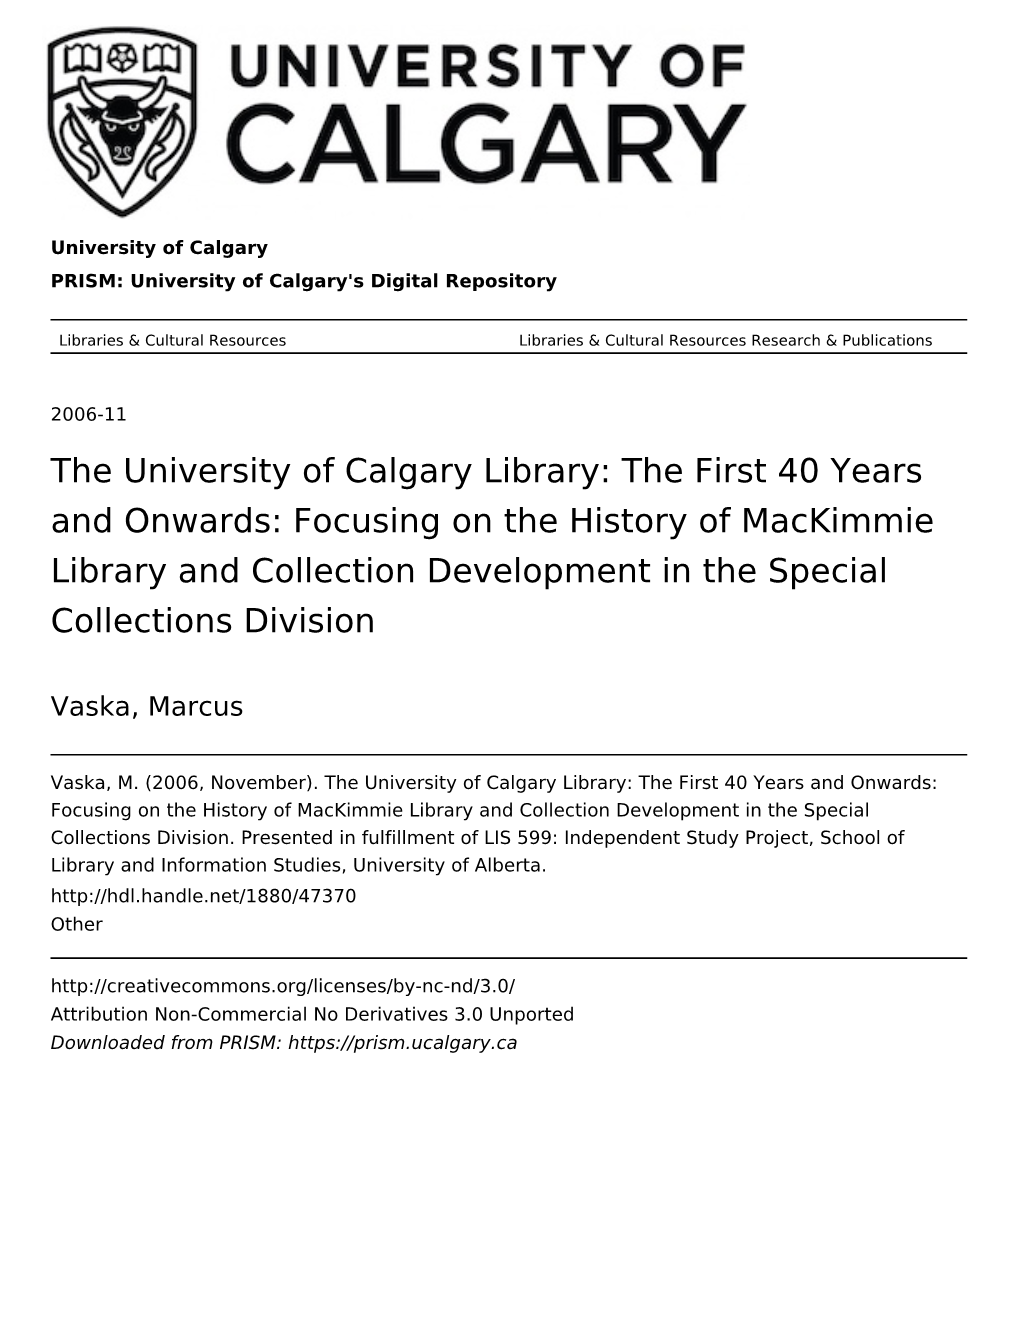 Focusing on the History of Mackimmie Library and Collection Development in the Special Collections Division